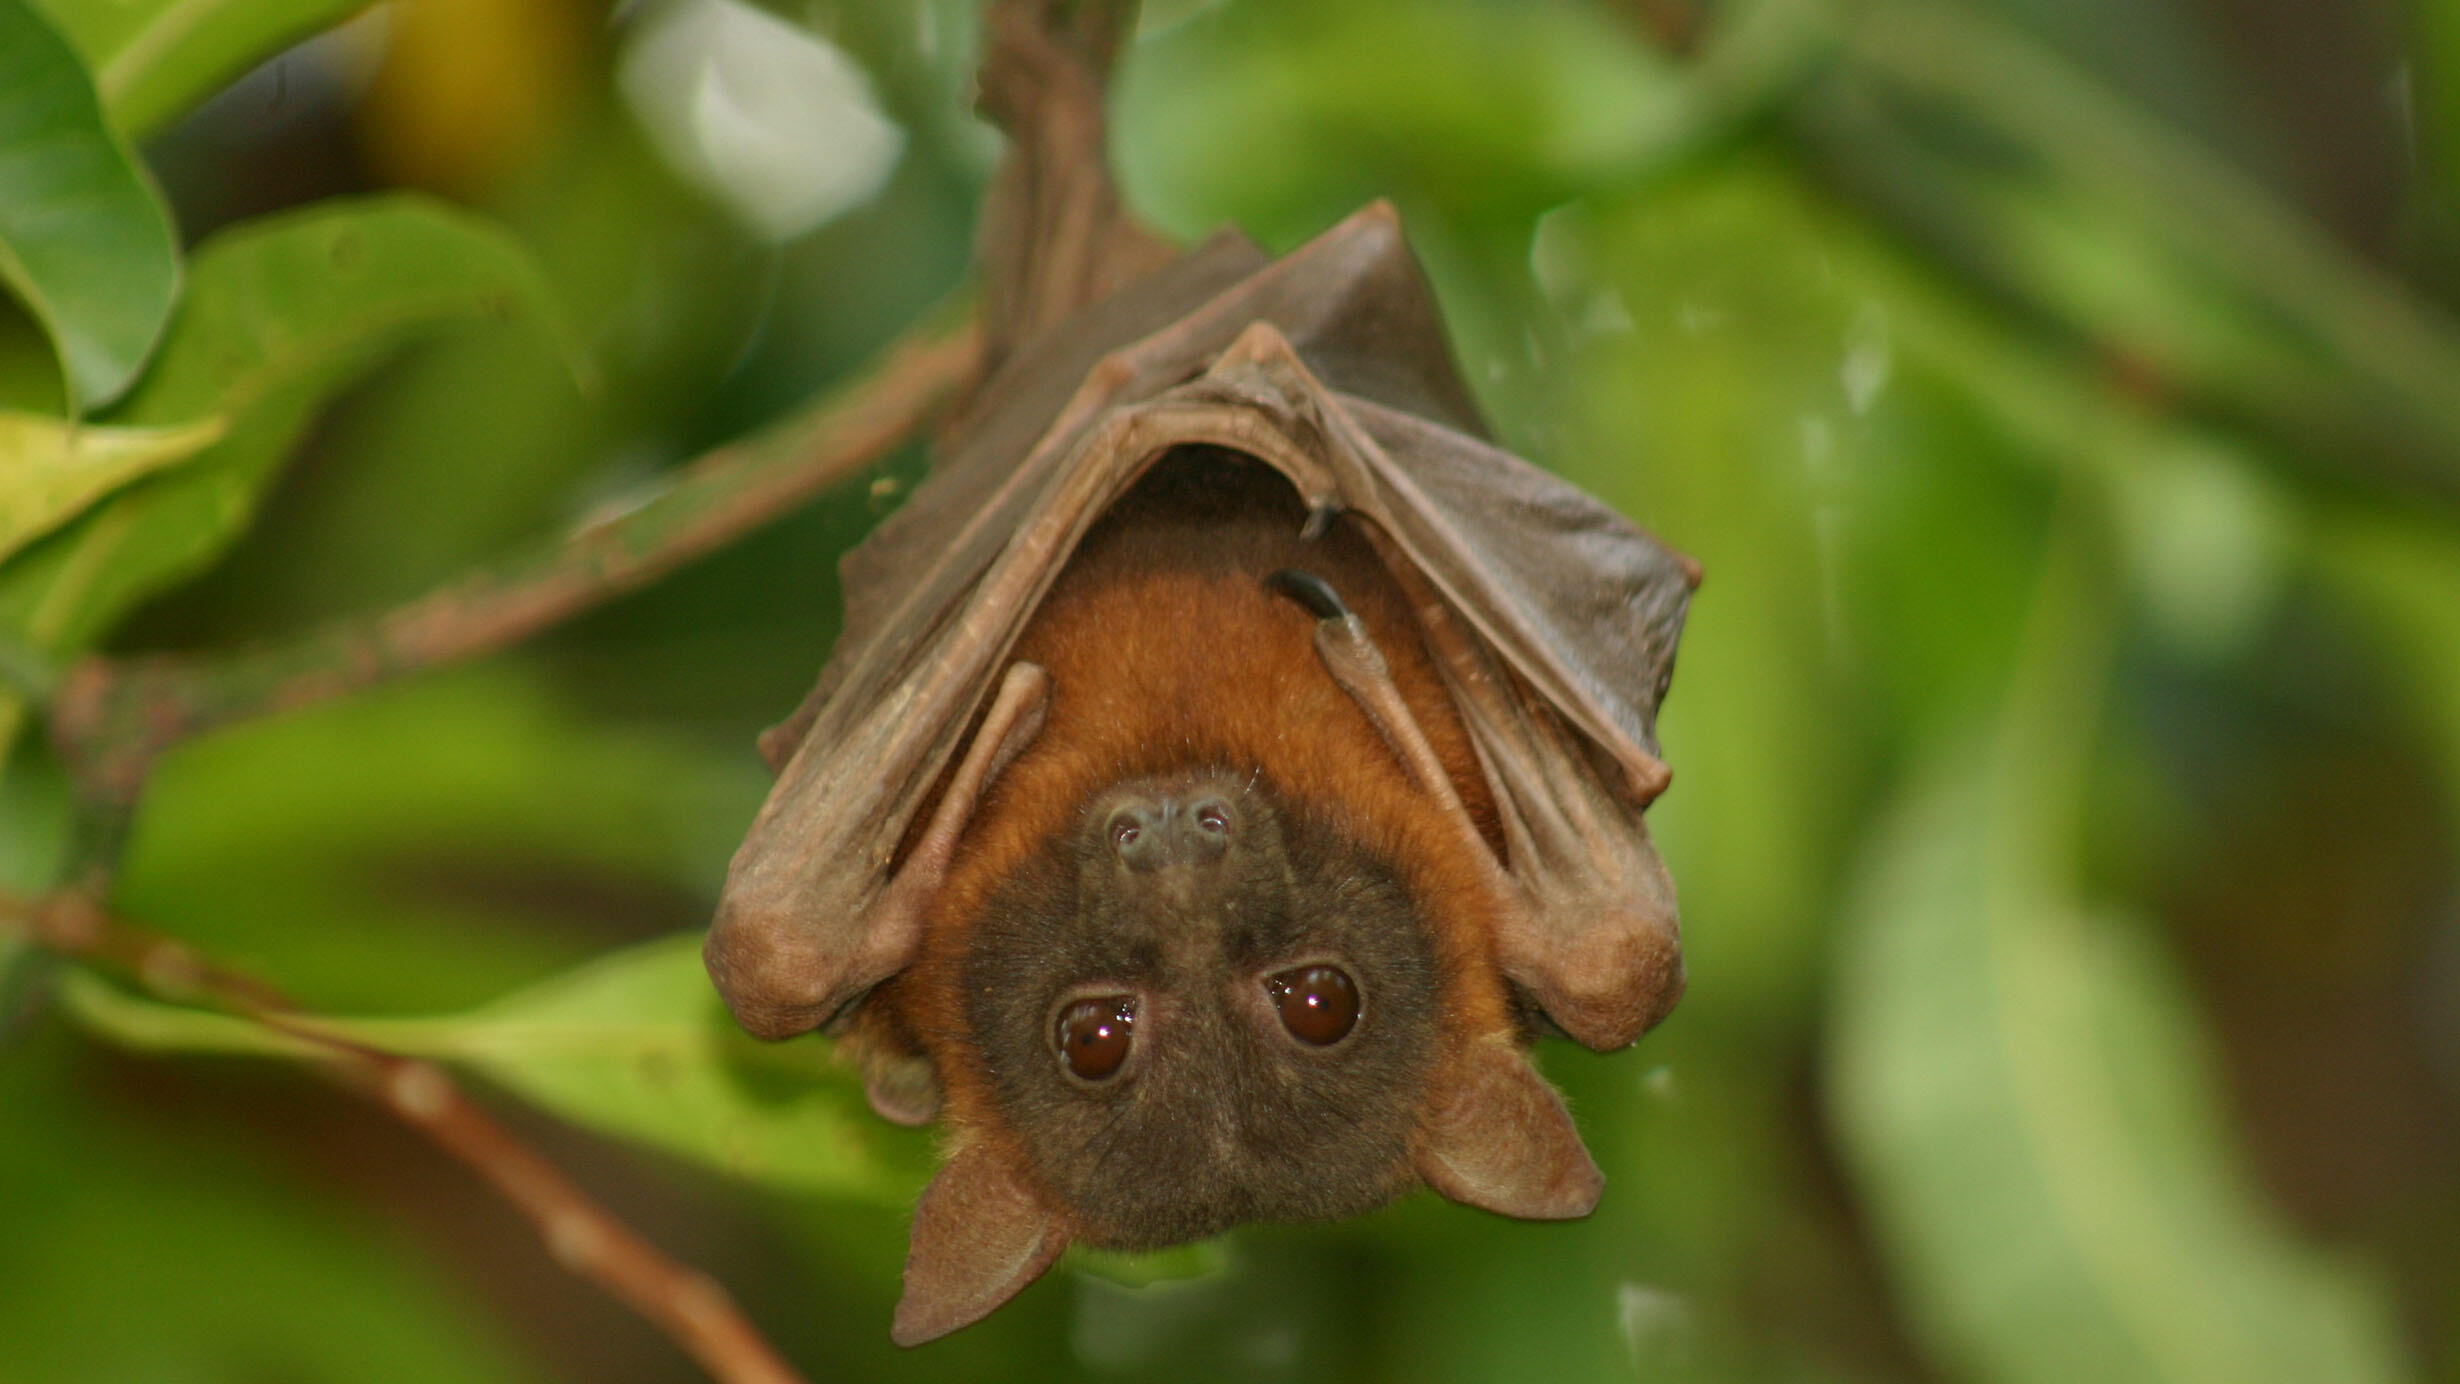 A red flying fox hanging upside down with its wings closed from a plant.